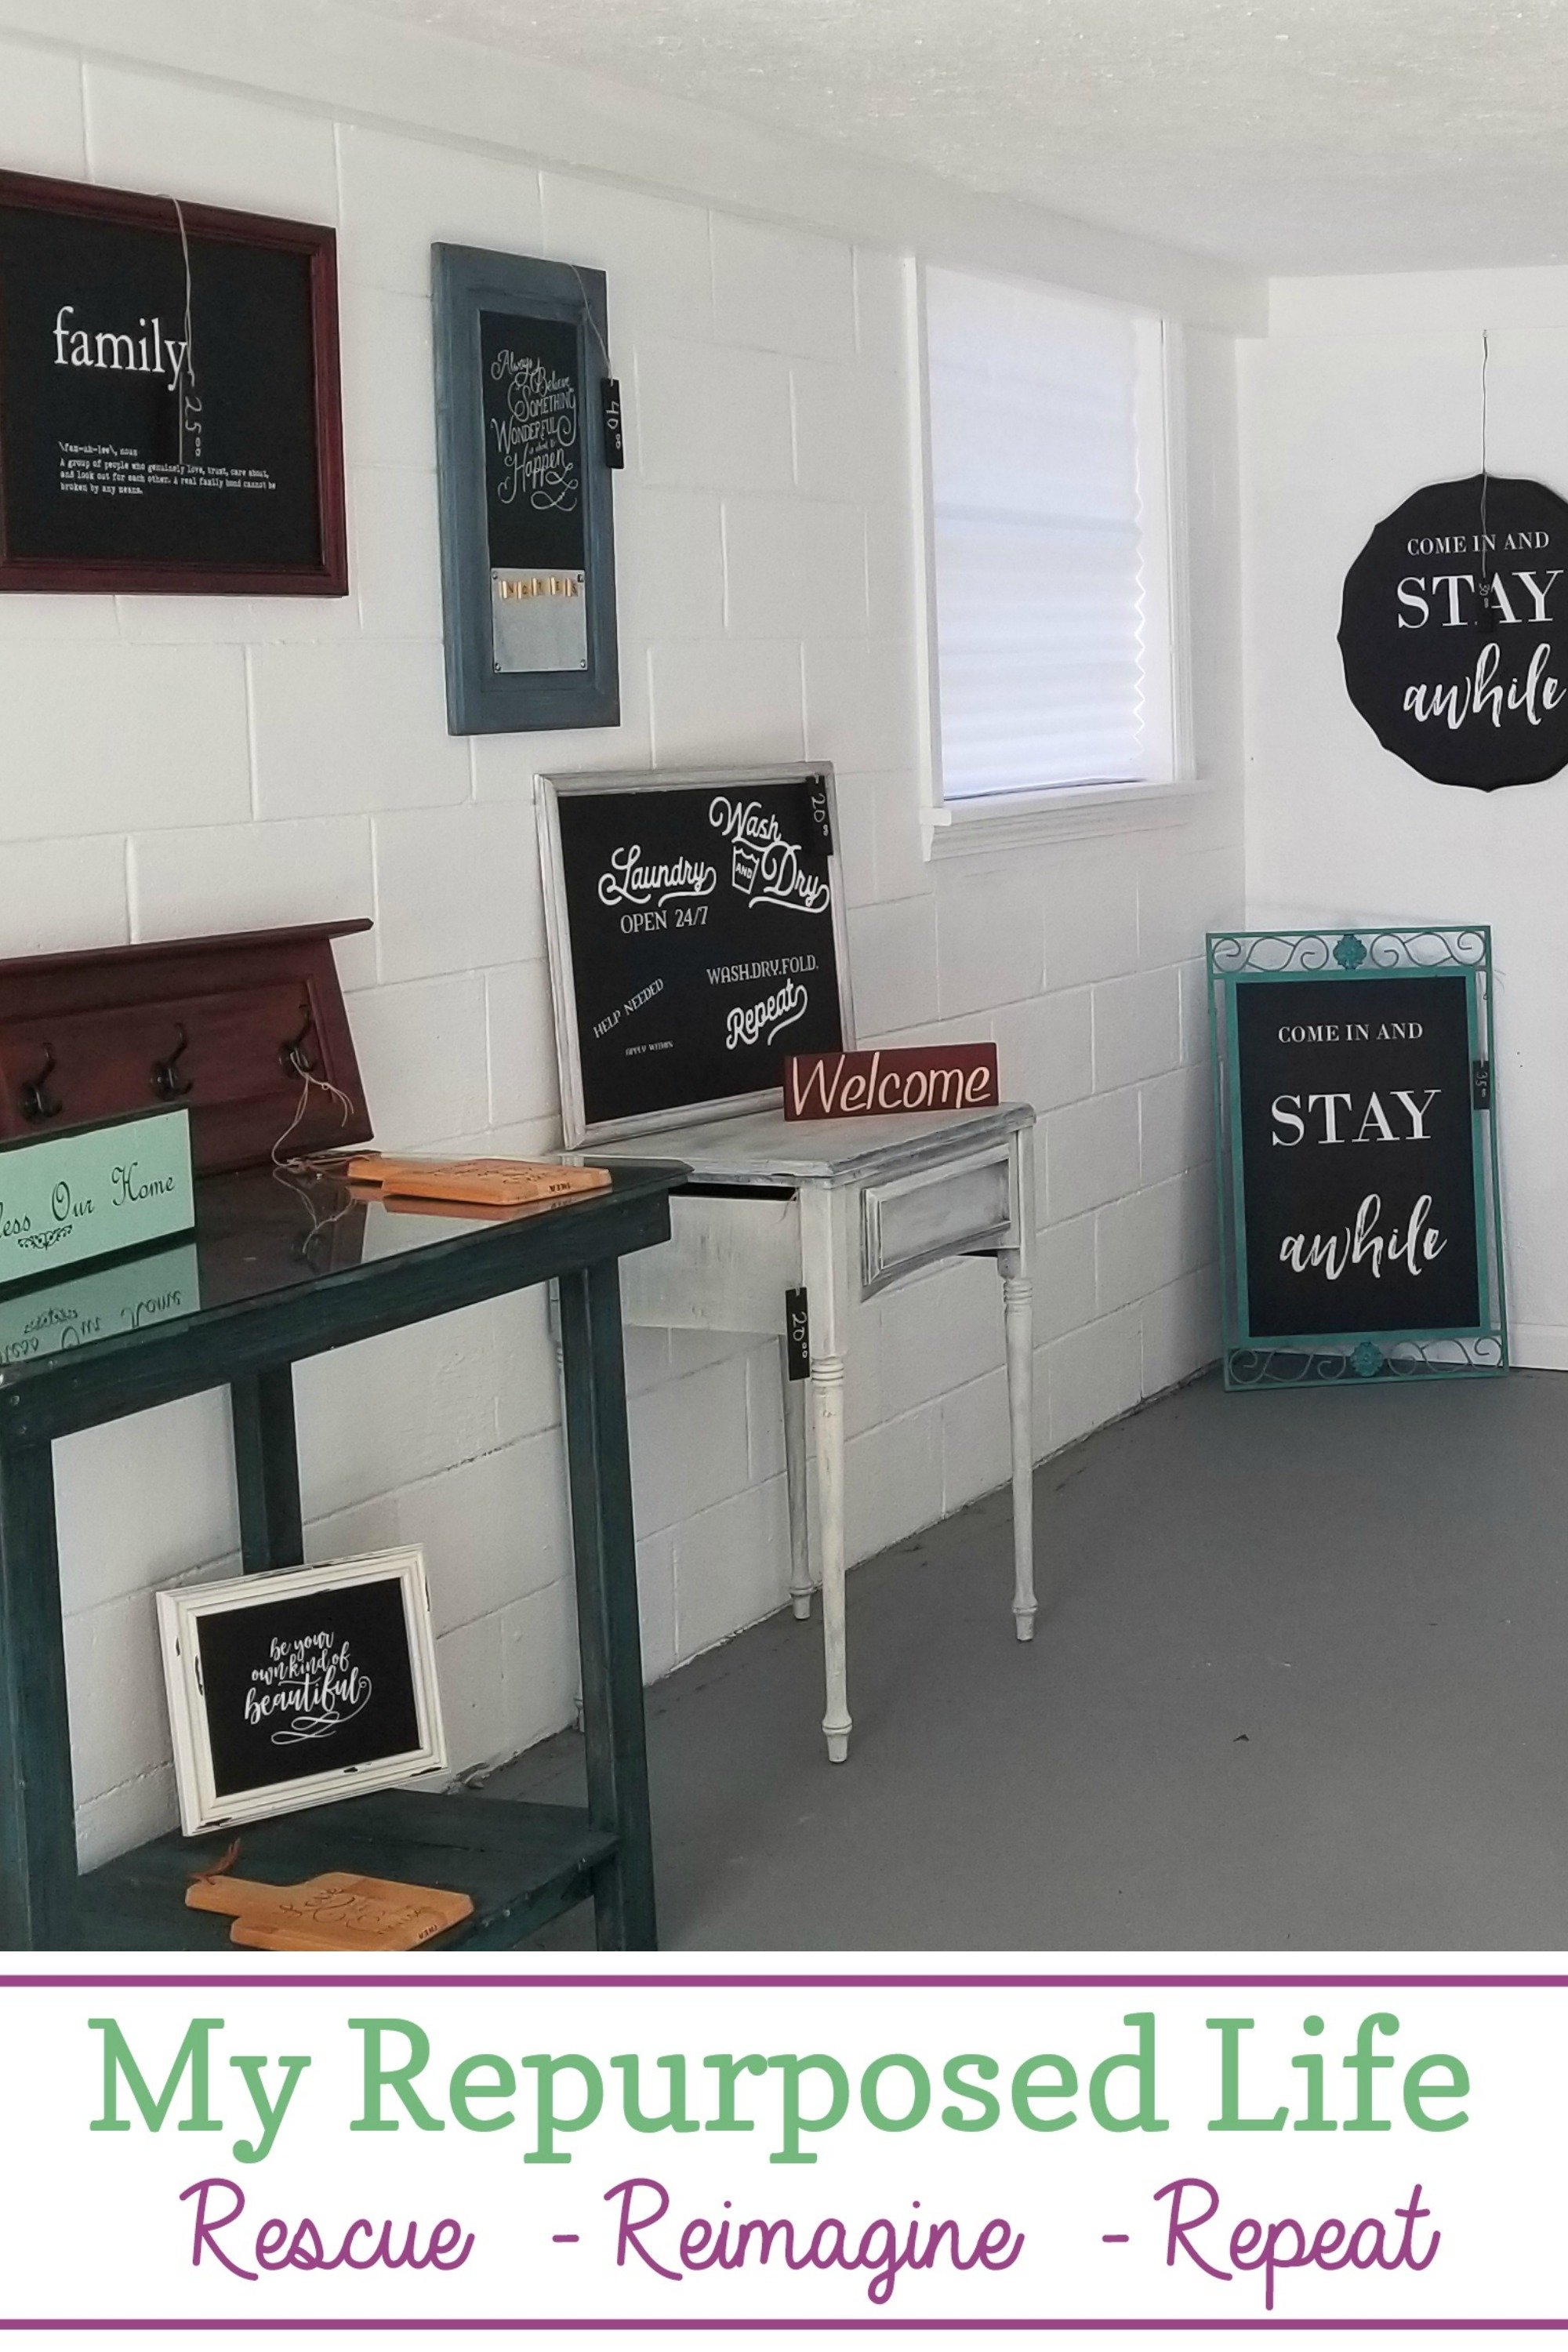 sometimes you have to think outside the box and get creative when you're a furniture flipper. An old outbuilding gets and update and serves a new purpose. #MyRepurposedLife #furniture #flipper #repurposed #outbuilding #booth #selling via @repurposedlife